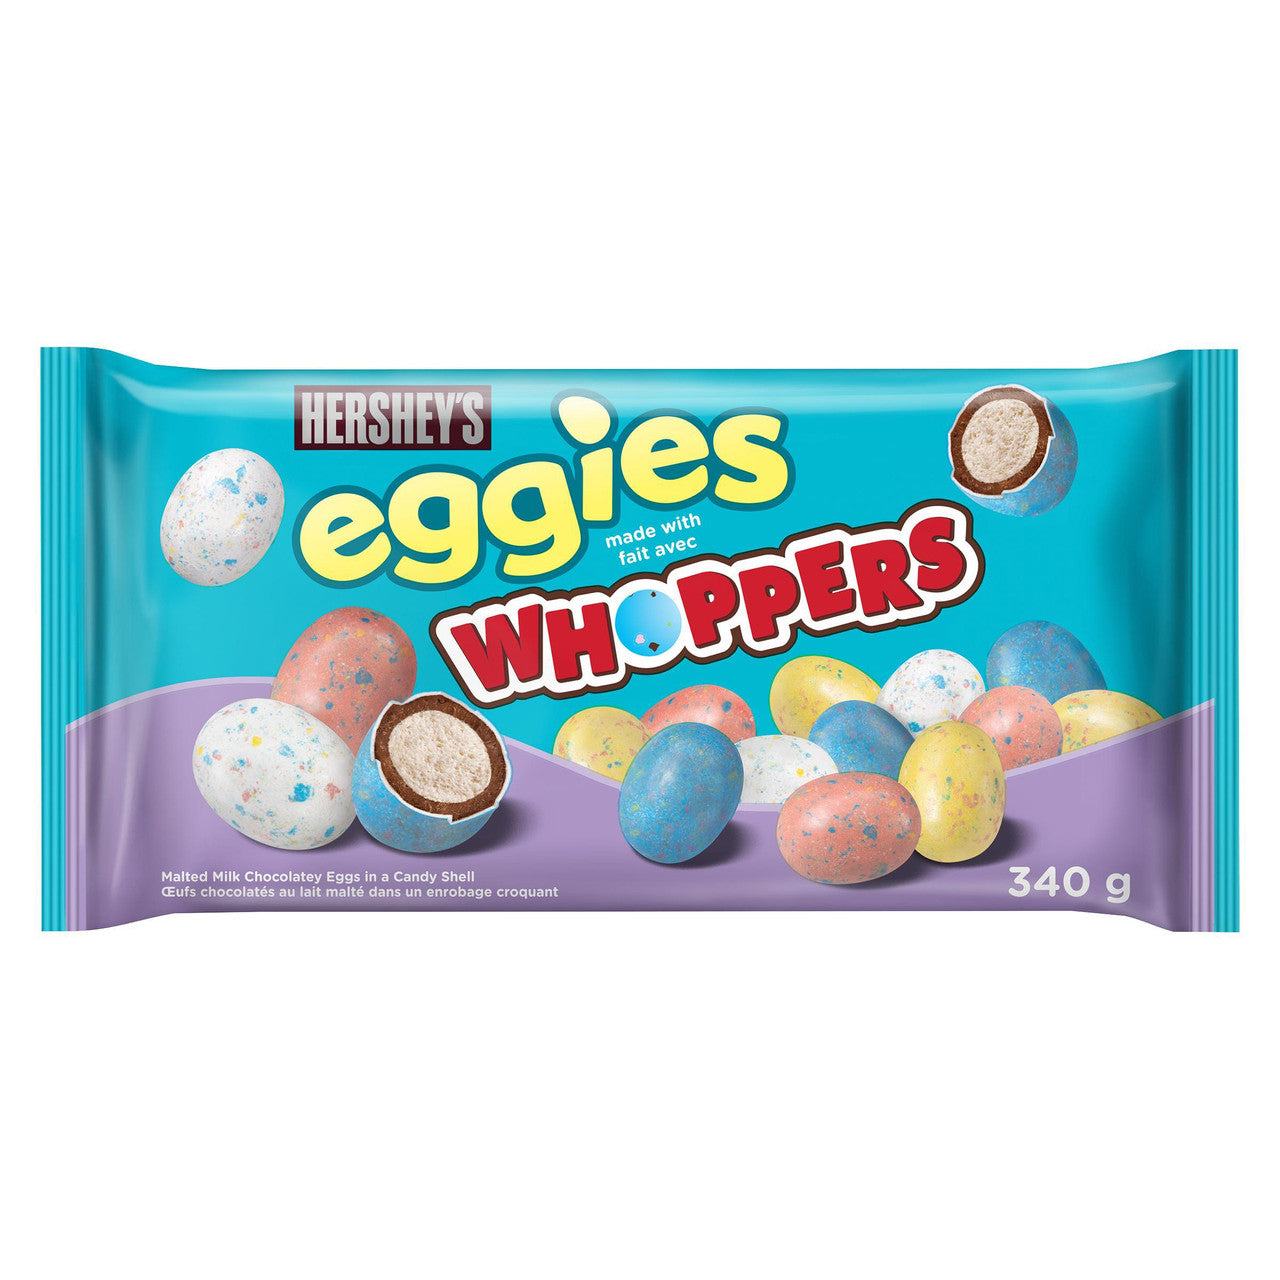 Eggies made with Whoppers, 340g/12 oz. Bag {Imported from Canada}